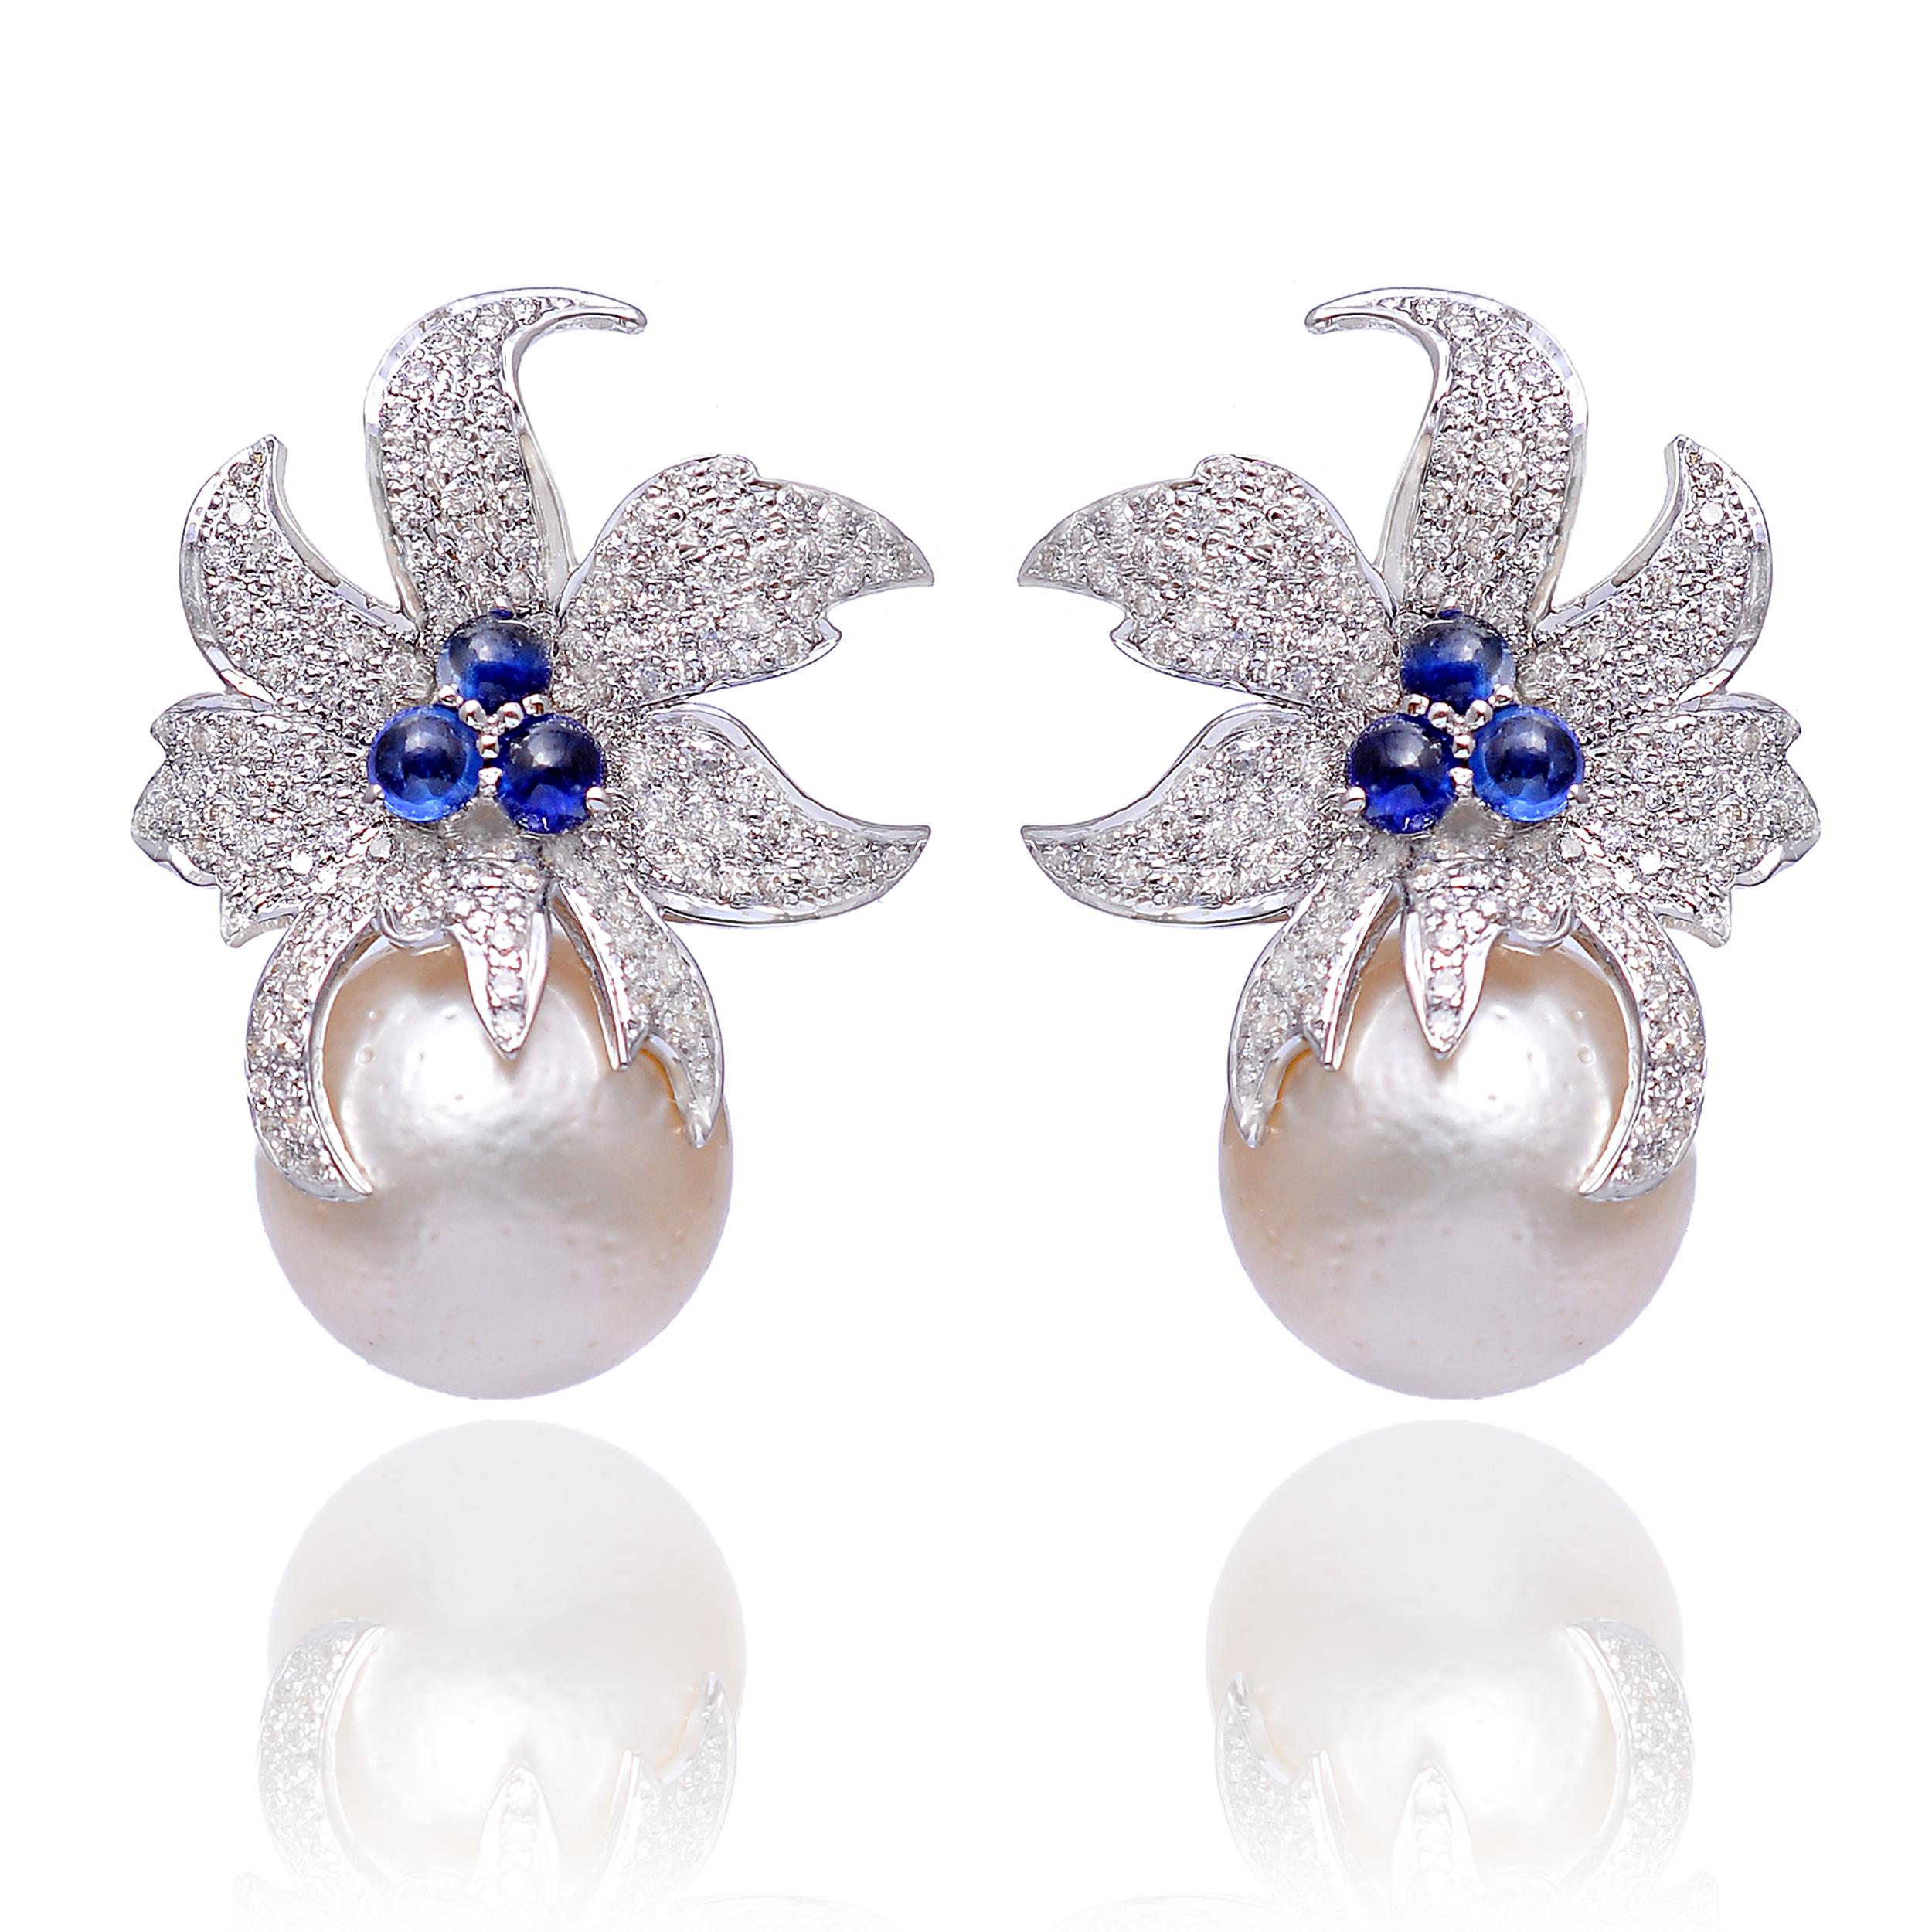 Get ready to spellbind in these exceptionally beautiful dangle earrings. Expertly crafted with sapphire, emerald pearl and diamonds, this timeless design is set in 14K white gold. 

Specifications:

Dimensions: 25 x 15 MM
Gross Weight: 13.610